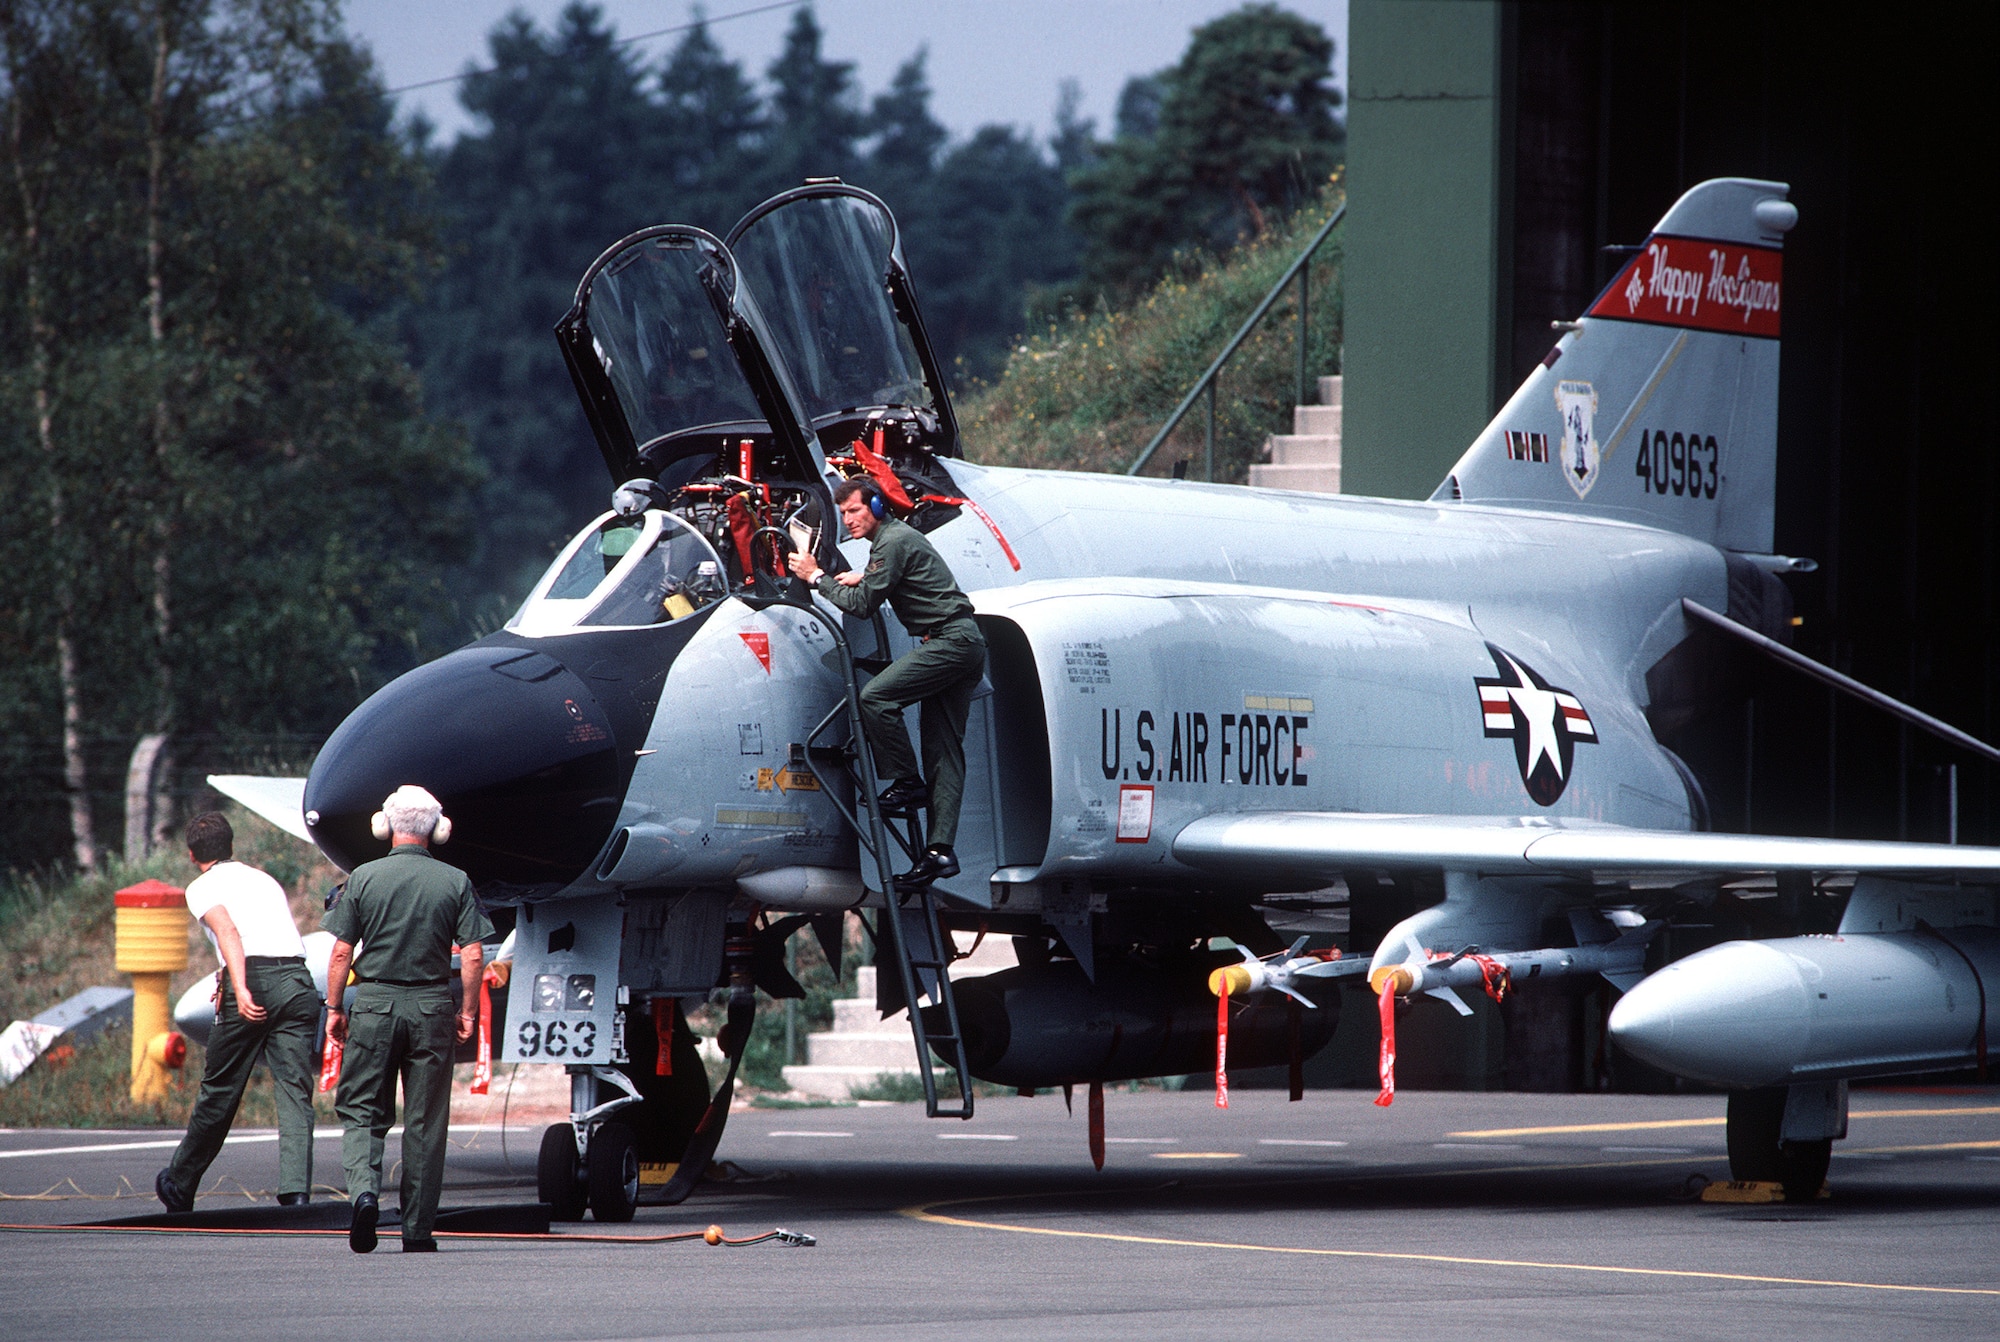 Maintenance crews prepare an ANG F-4D Phantom II aircraft for launch during Creek Klaxon, a deployment where Air National Guard units from 20 states were sent to temporarily assume the Zulu Alert duties of the 526th Tactical Fighter Squadron (USAFE) at Ramstein Air Base, Germany, from 1 April 1986 to 1 April 1987.   